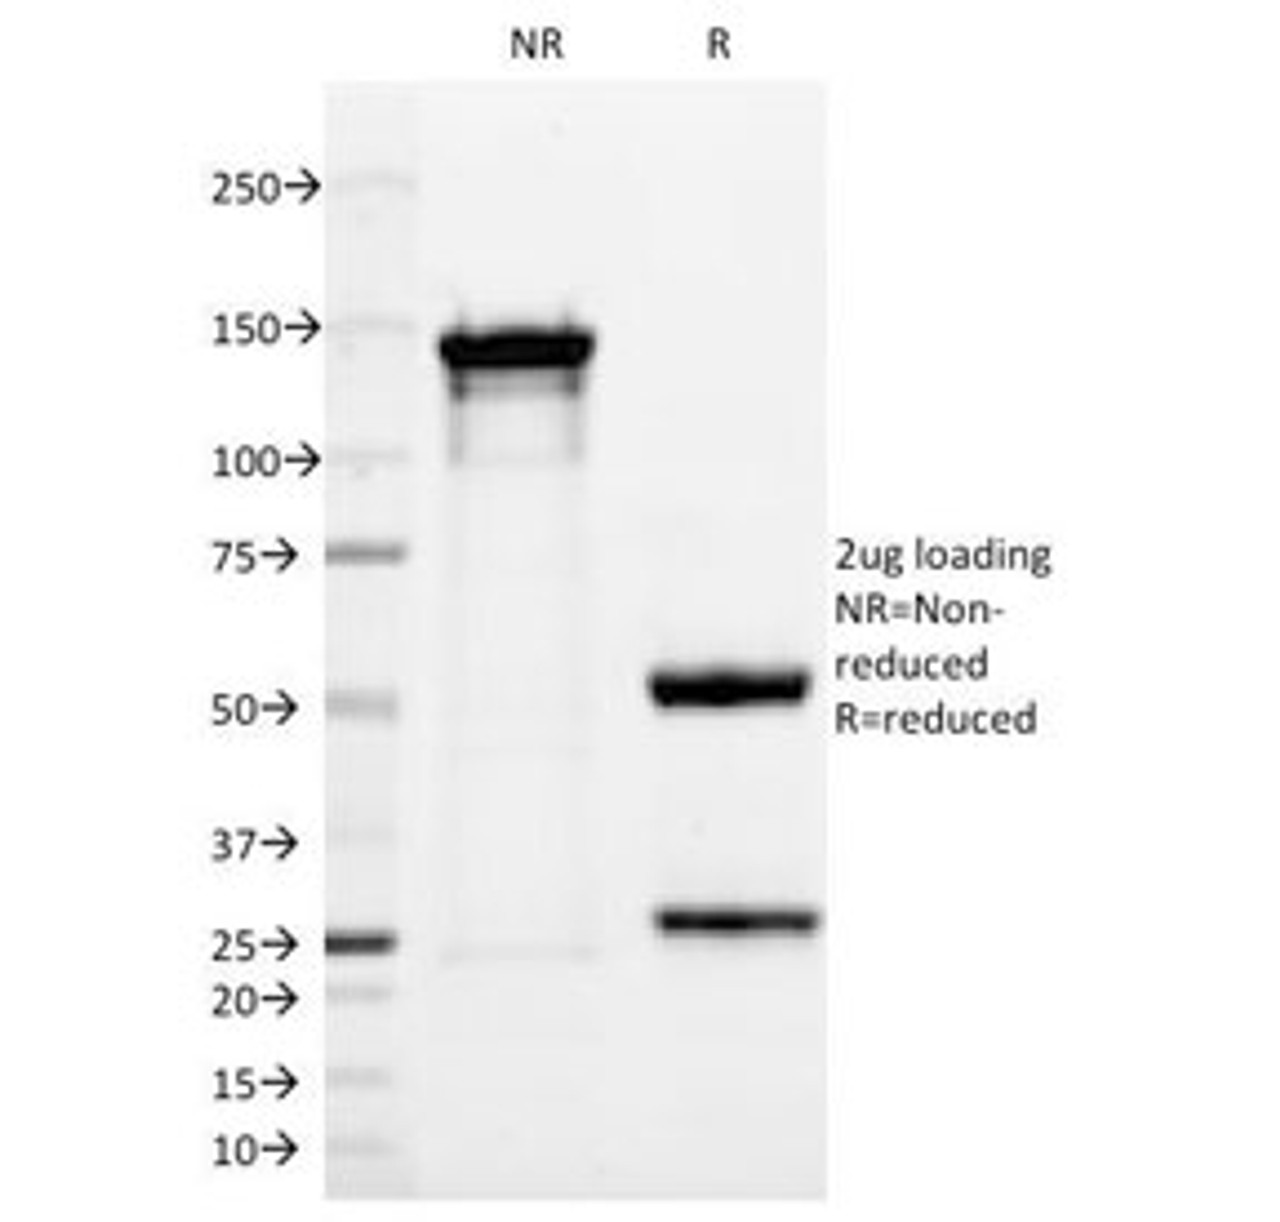 SDS-PAGE Analysis of Purified, BSA-Free UchL1 Antibody (clone 13C4) . Confirmation of Integrity and Purity of the Antibody.